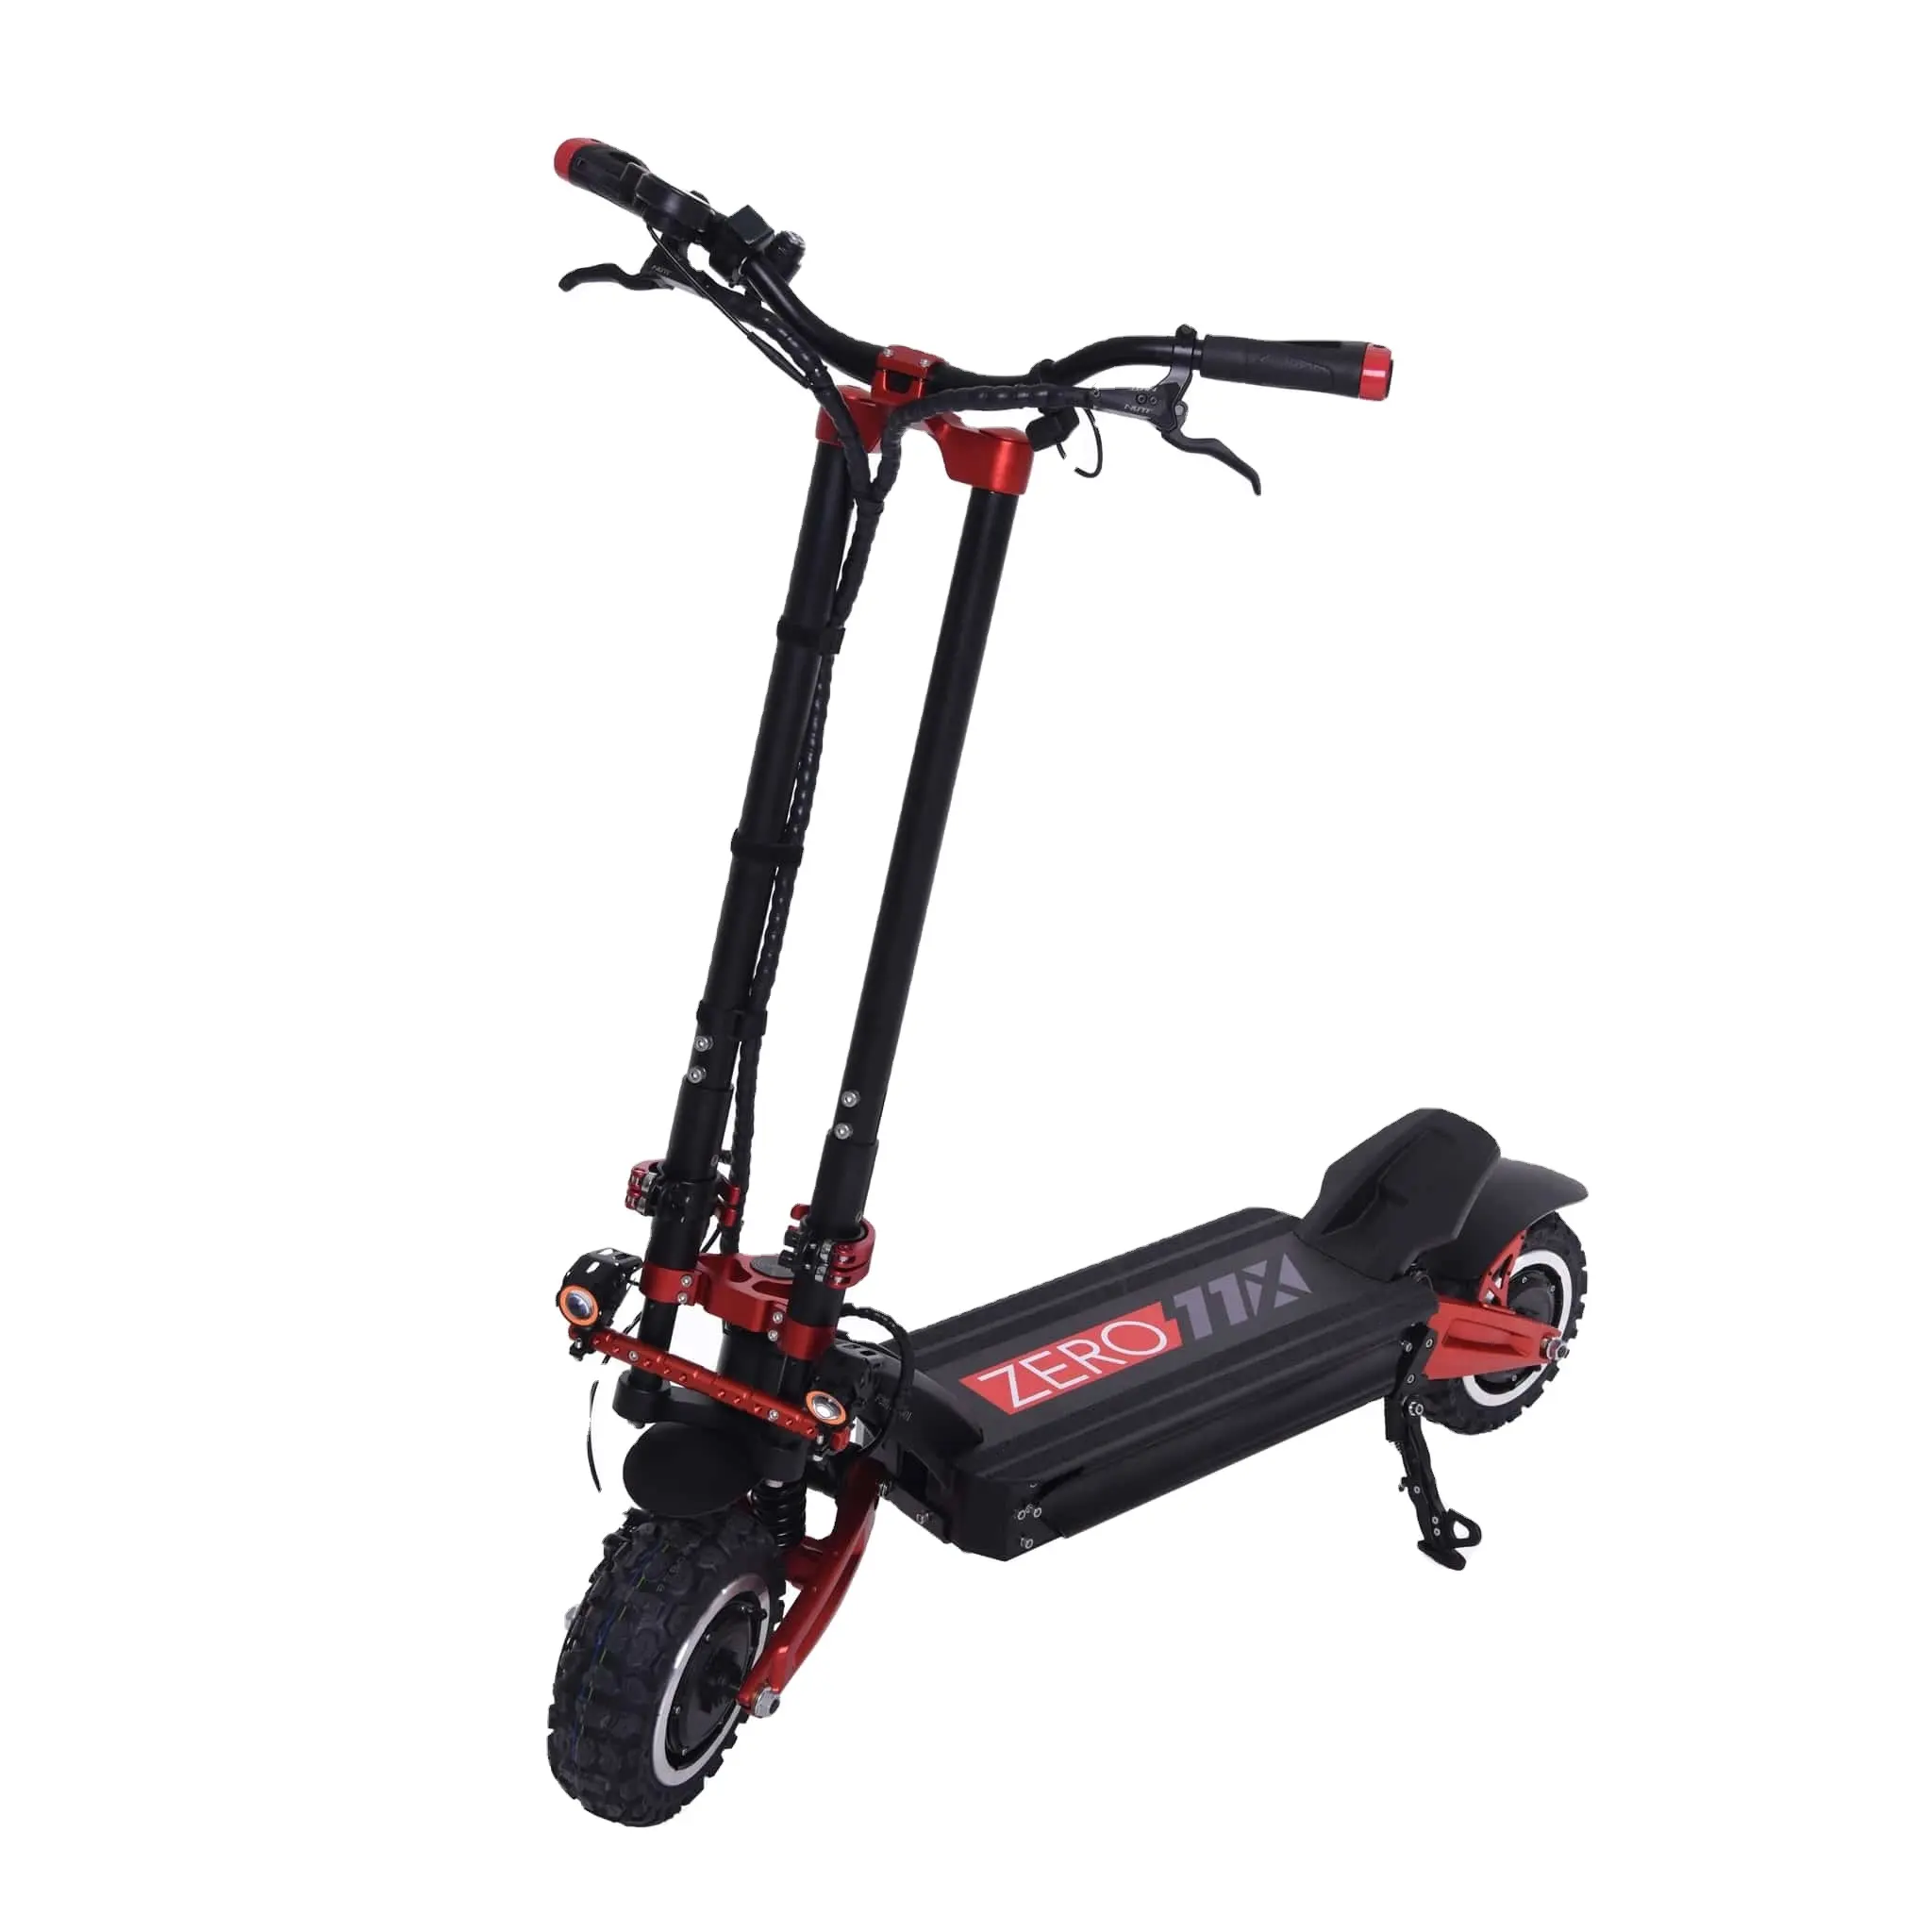 Cheap Foldable Off Road Electric Scooter 1000w 500w,Electric Motorcycle Scooter,Scoter Electric Scooter